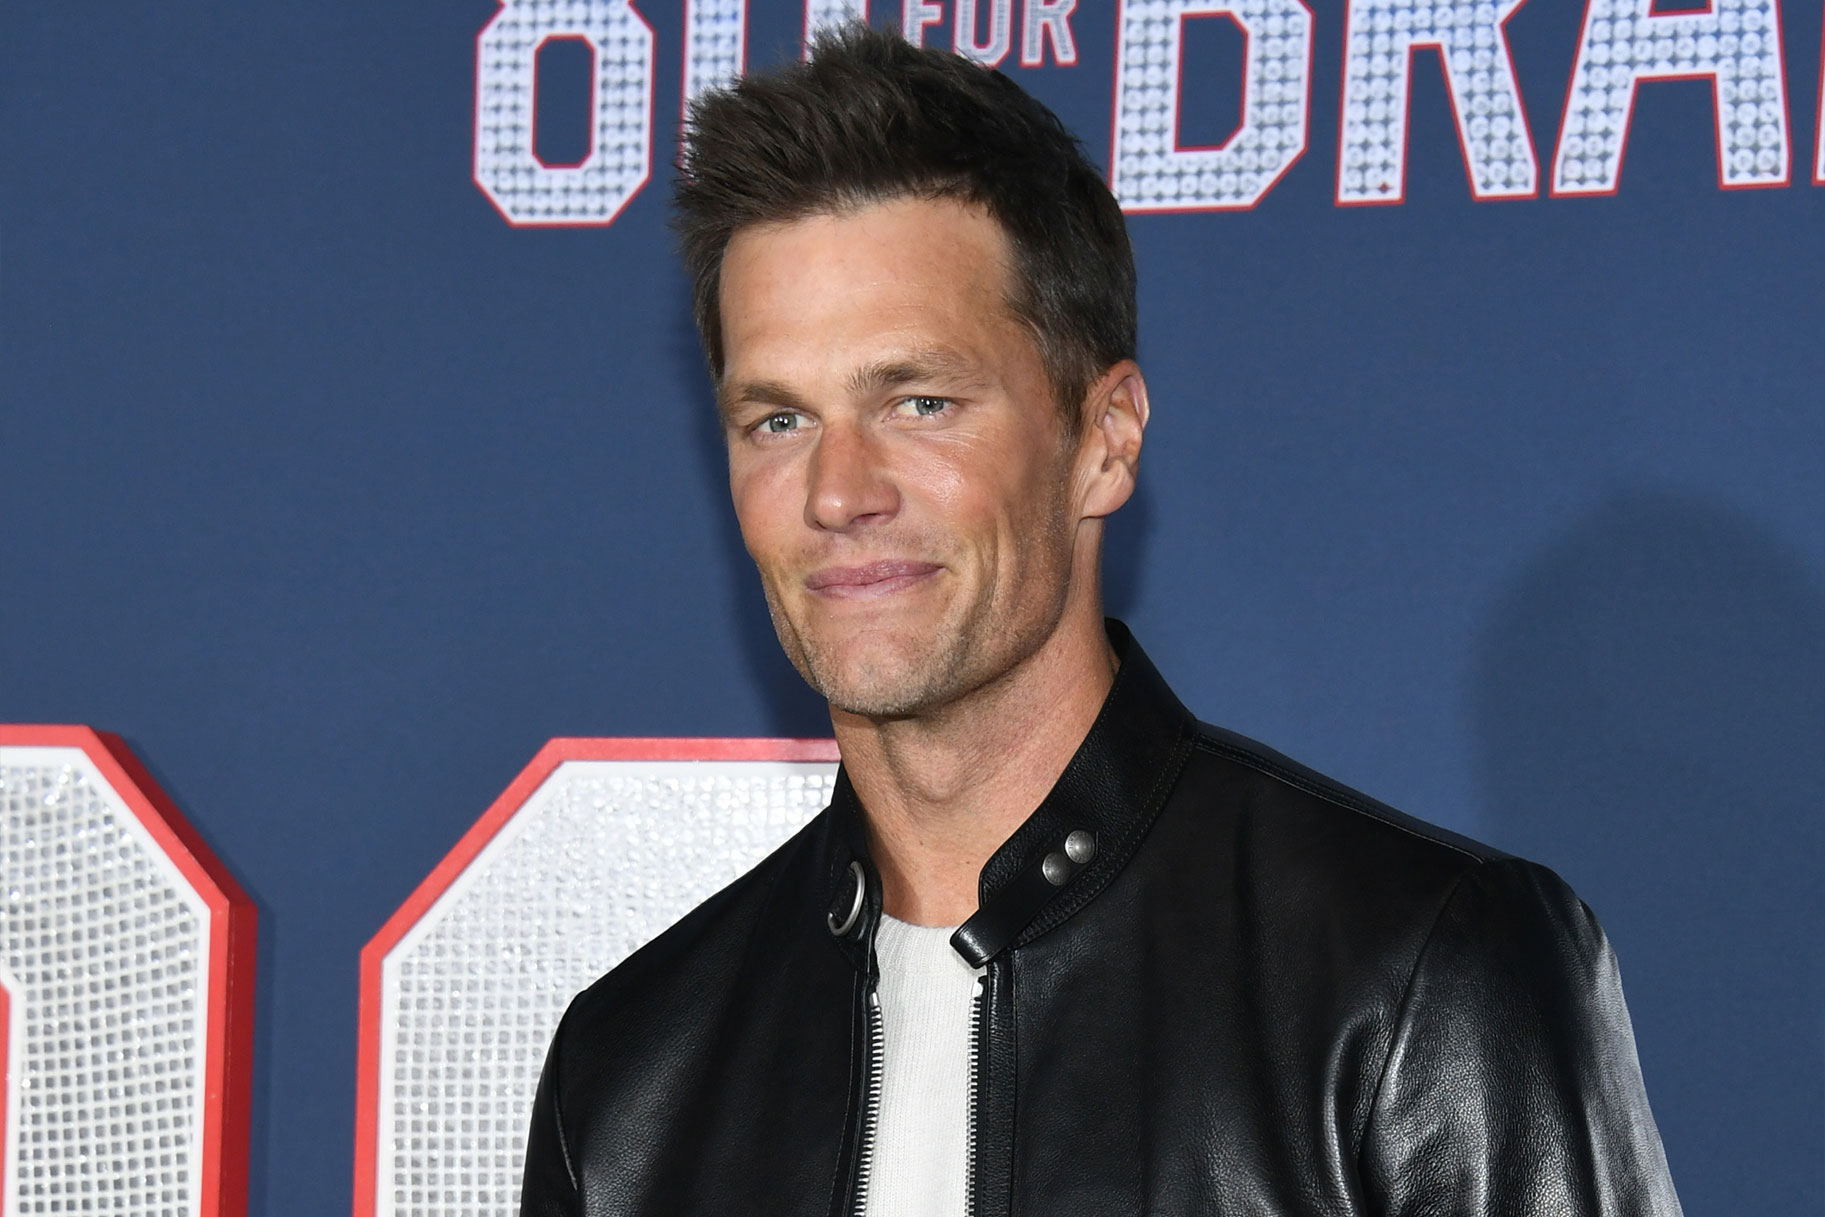 Tom Brady attends Los Angeles Premiere Screening Of Paramount Pictures' "80 For Brady"